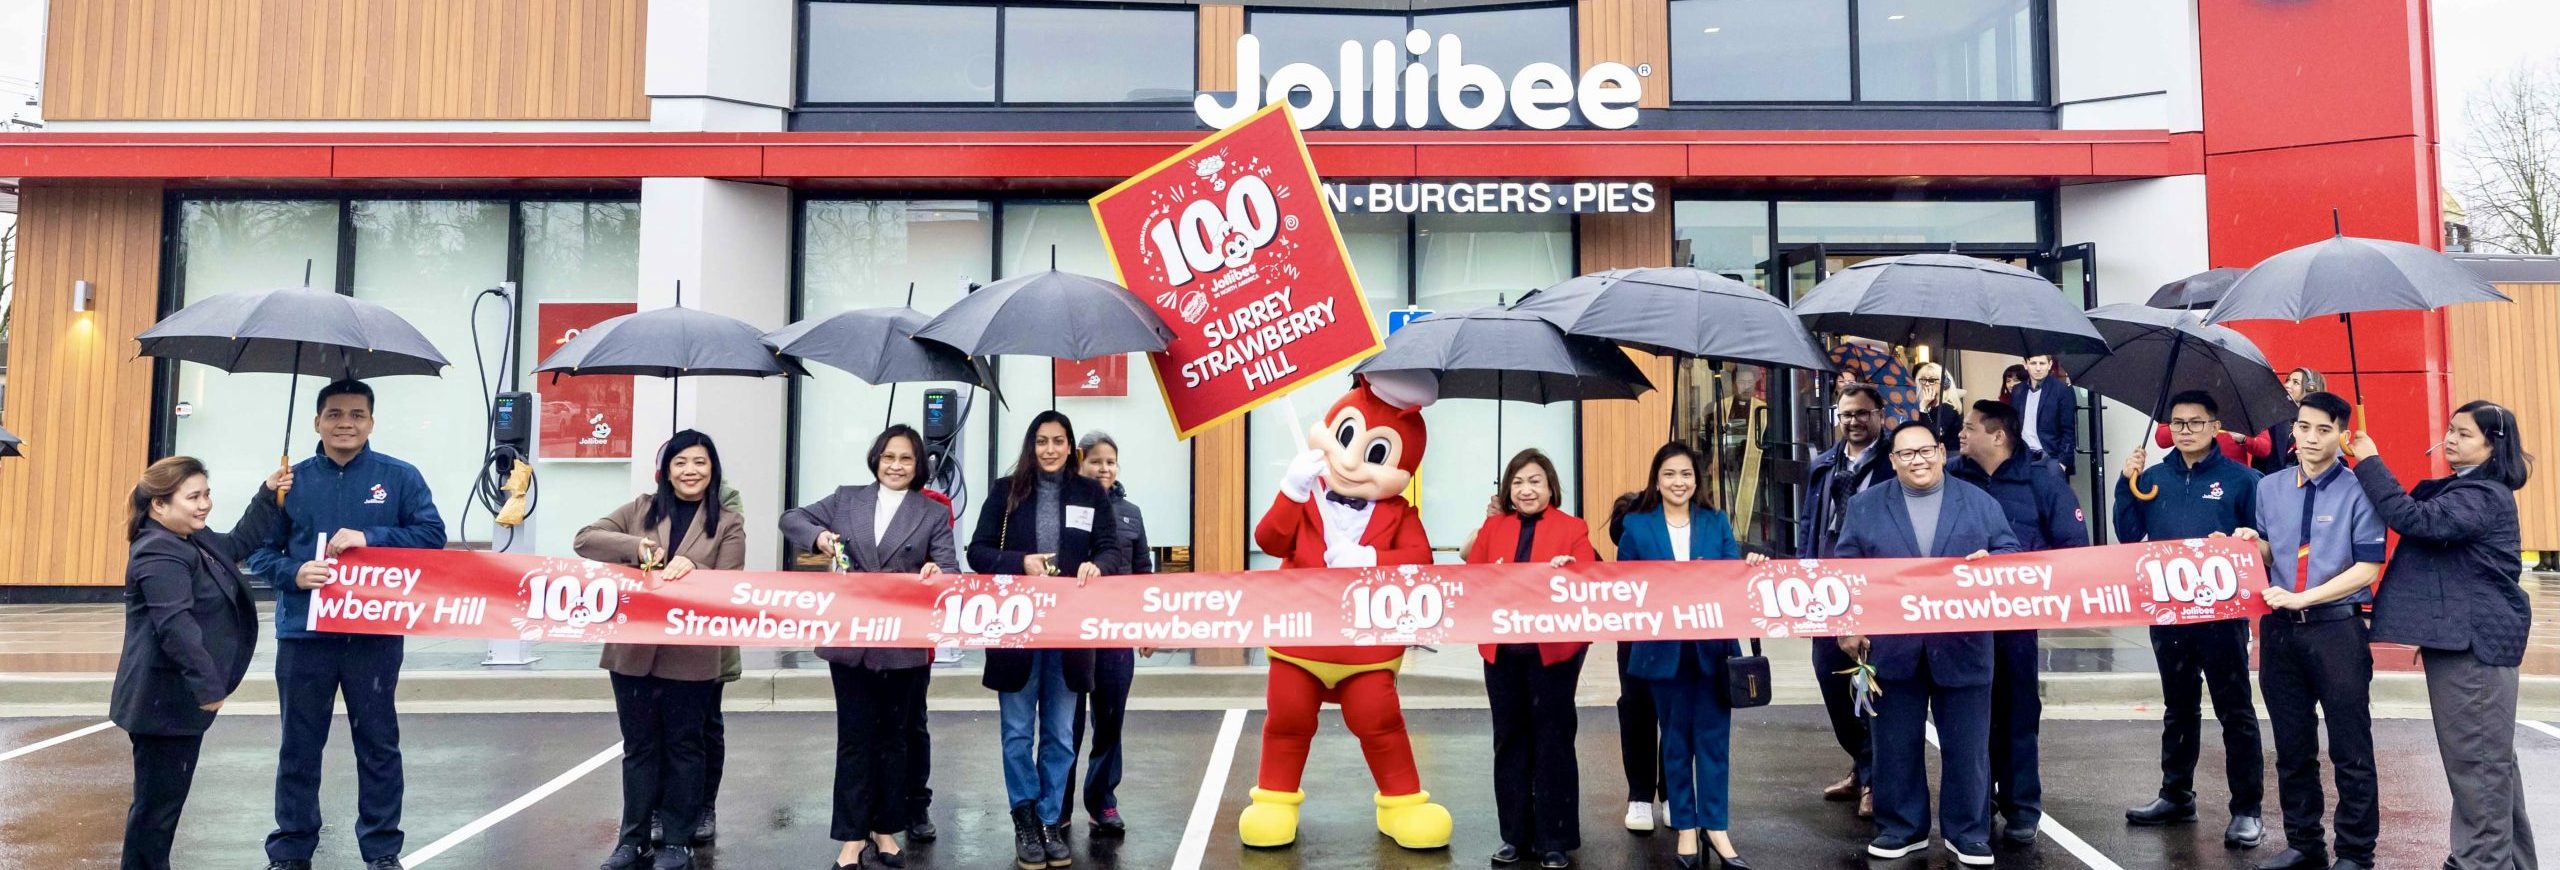 Jollibee Celebrates Milestone with the Inauguration of its 100th Store  in North America & 4th Store in British Columbia